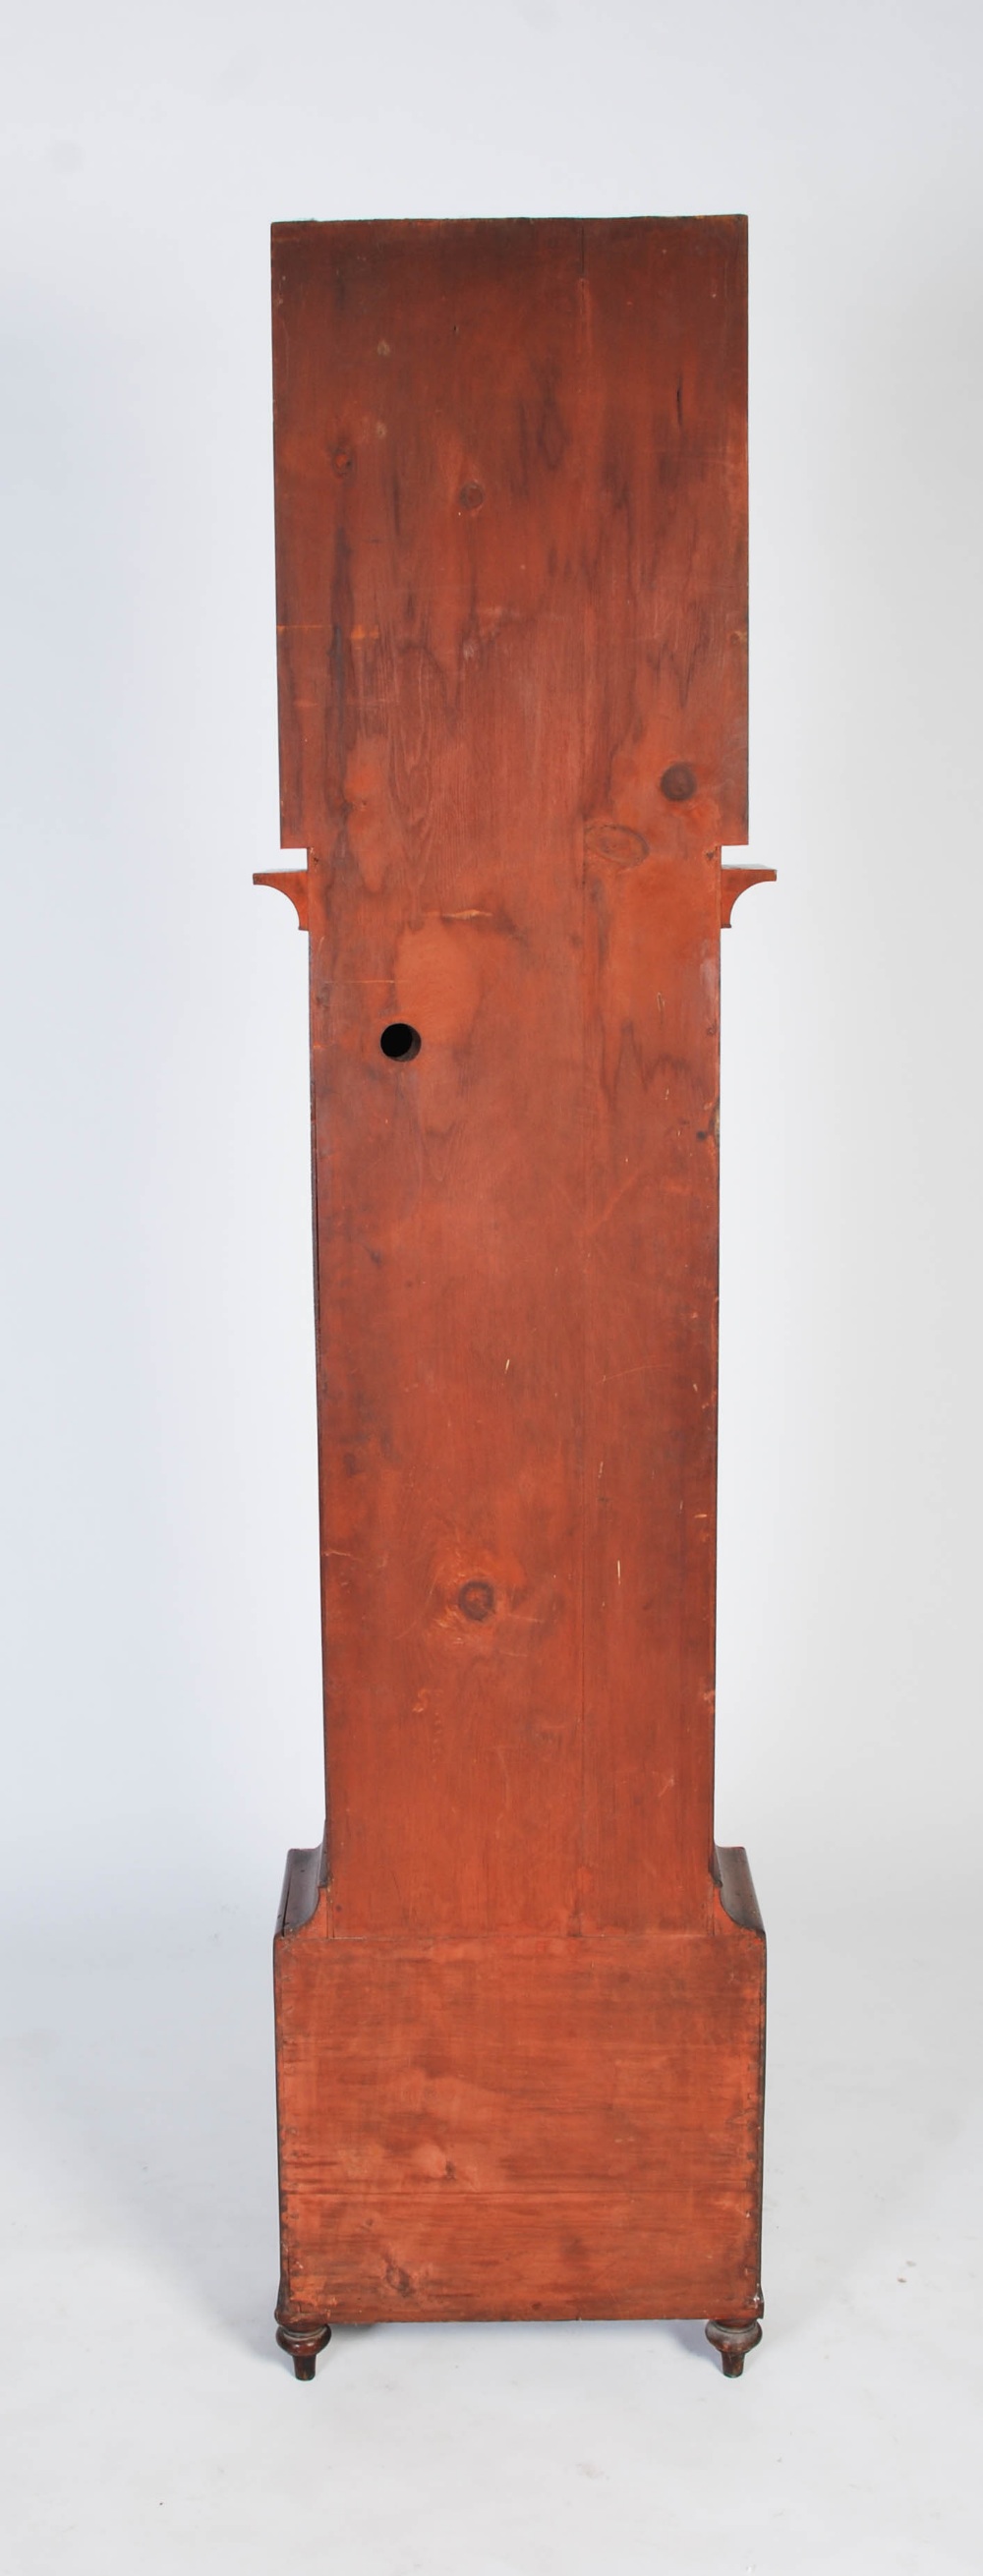 A 19th century Scottish mahogany longcase clock J. Brown, Kilmarnock, the caddy top hood with carved - Image 9 of 9